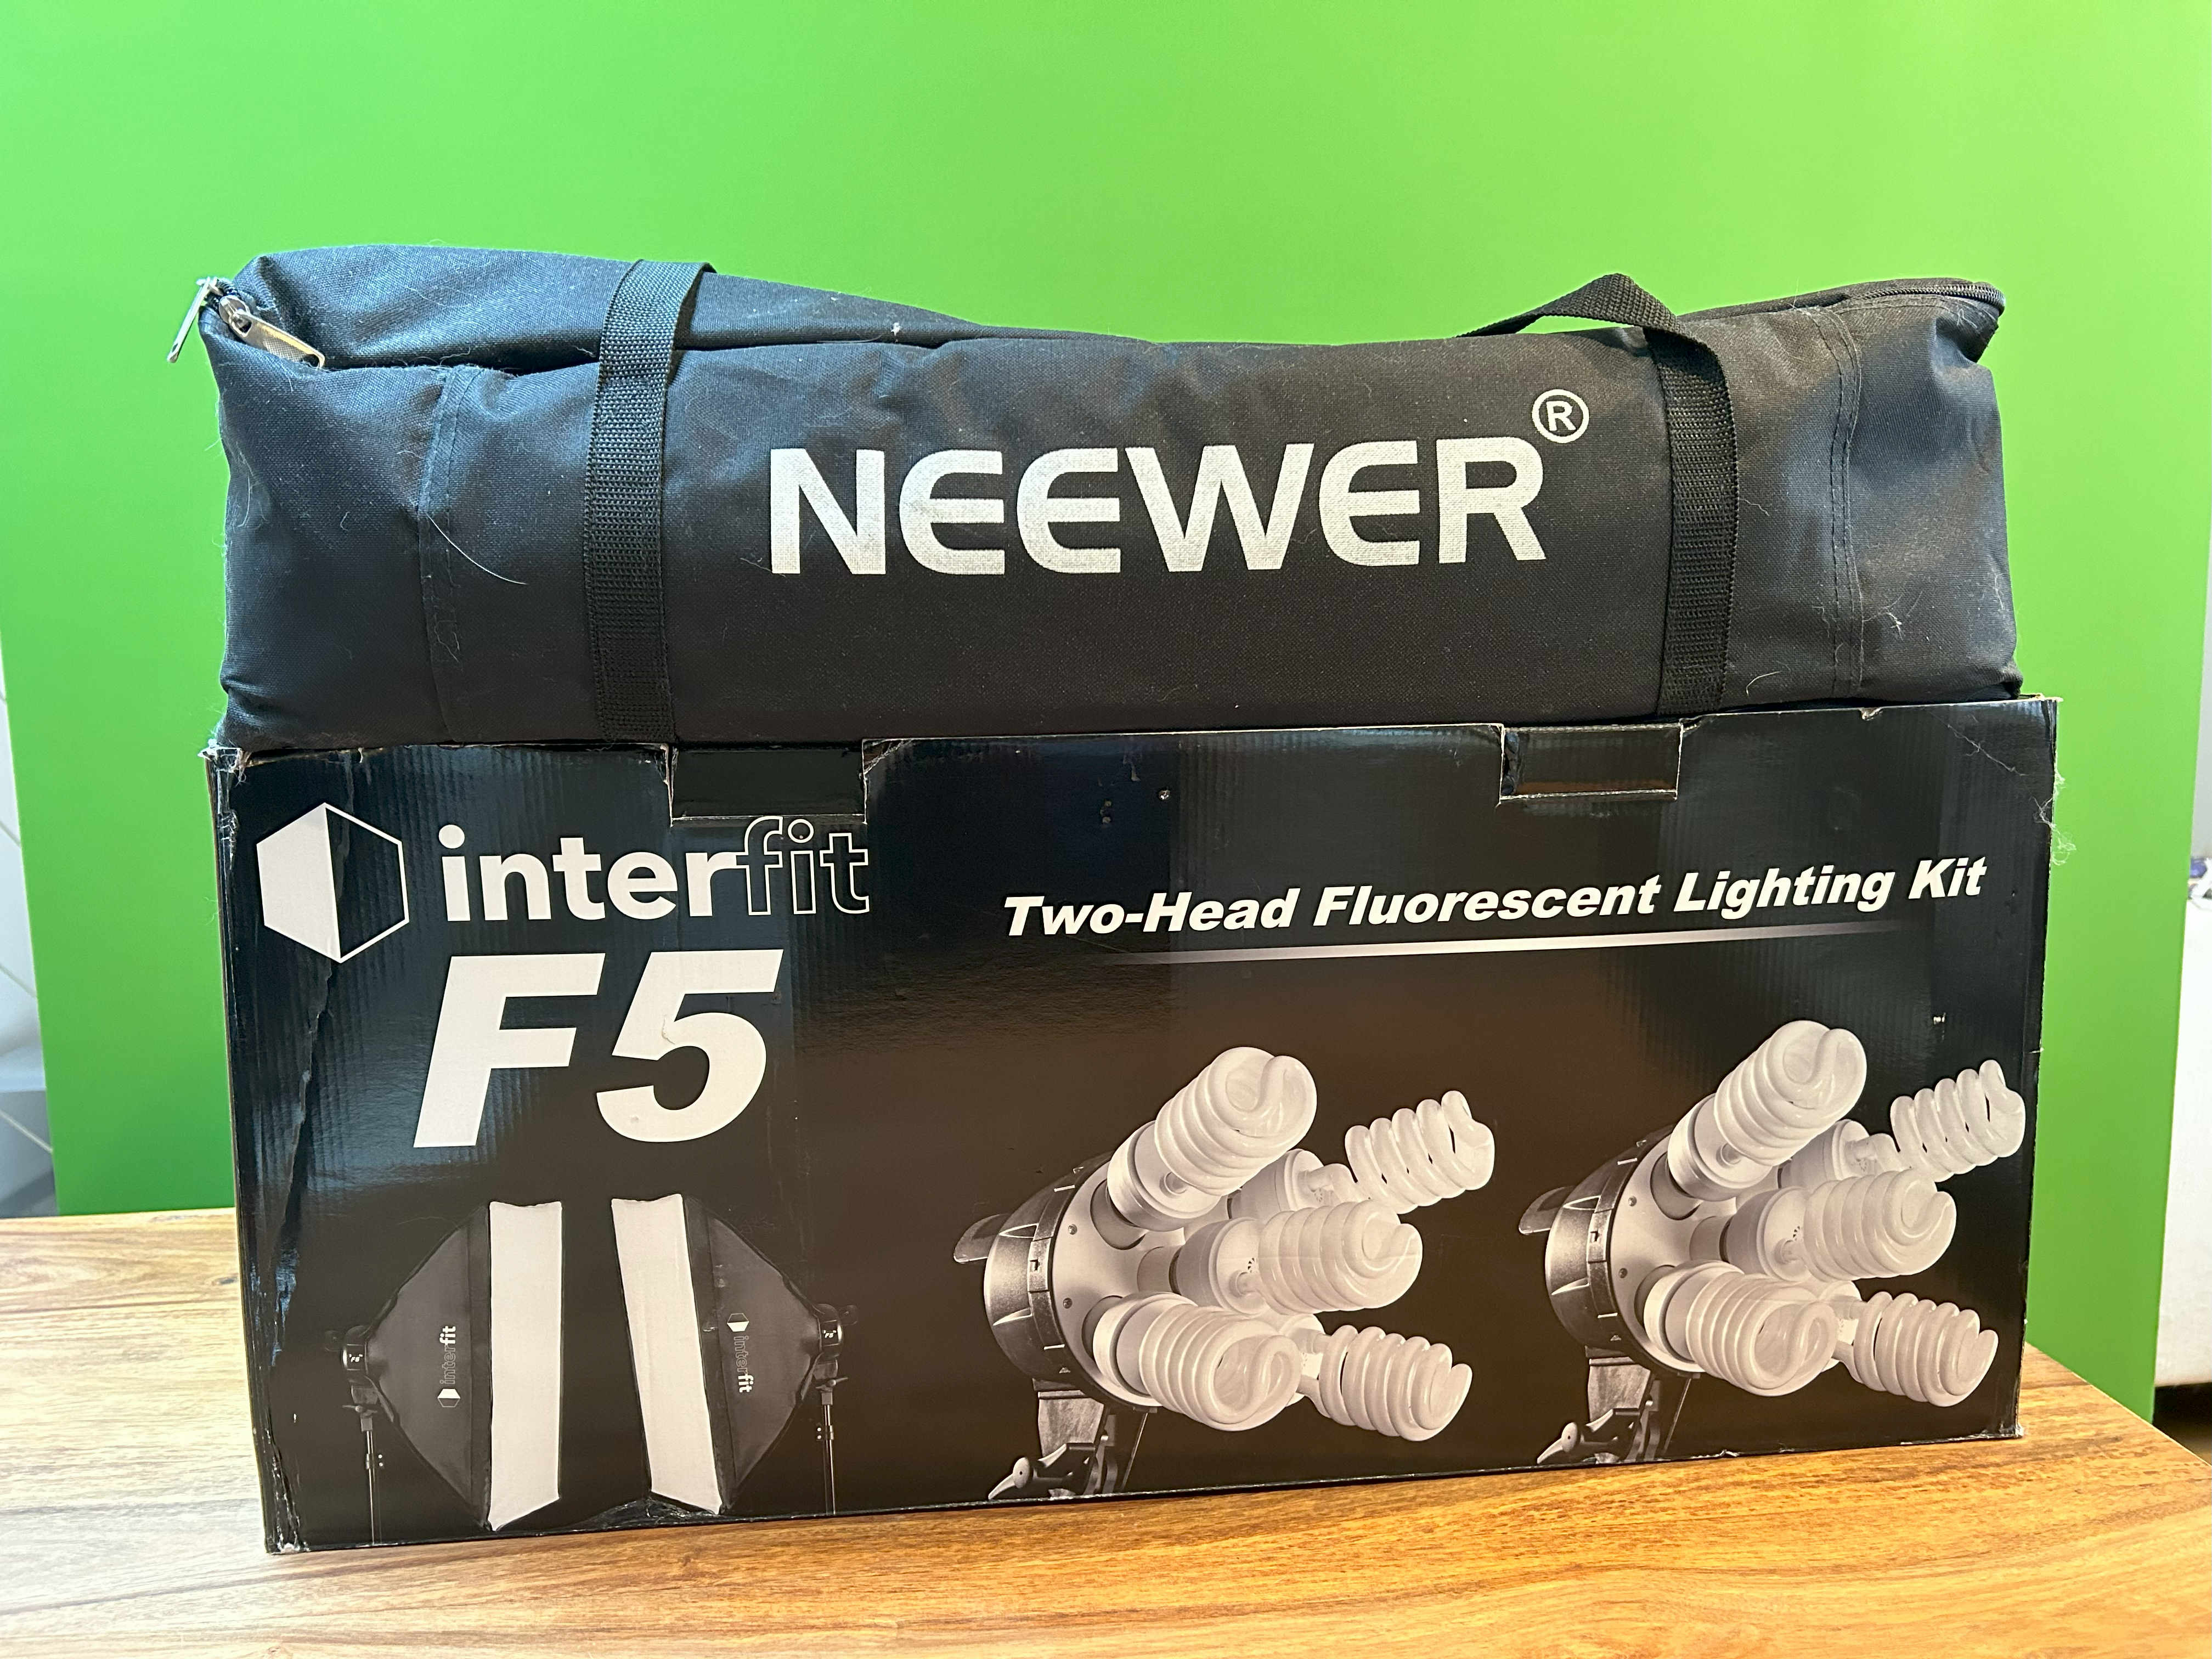 Neewer soft boxes and Interfit F5 soft boxes, all packed